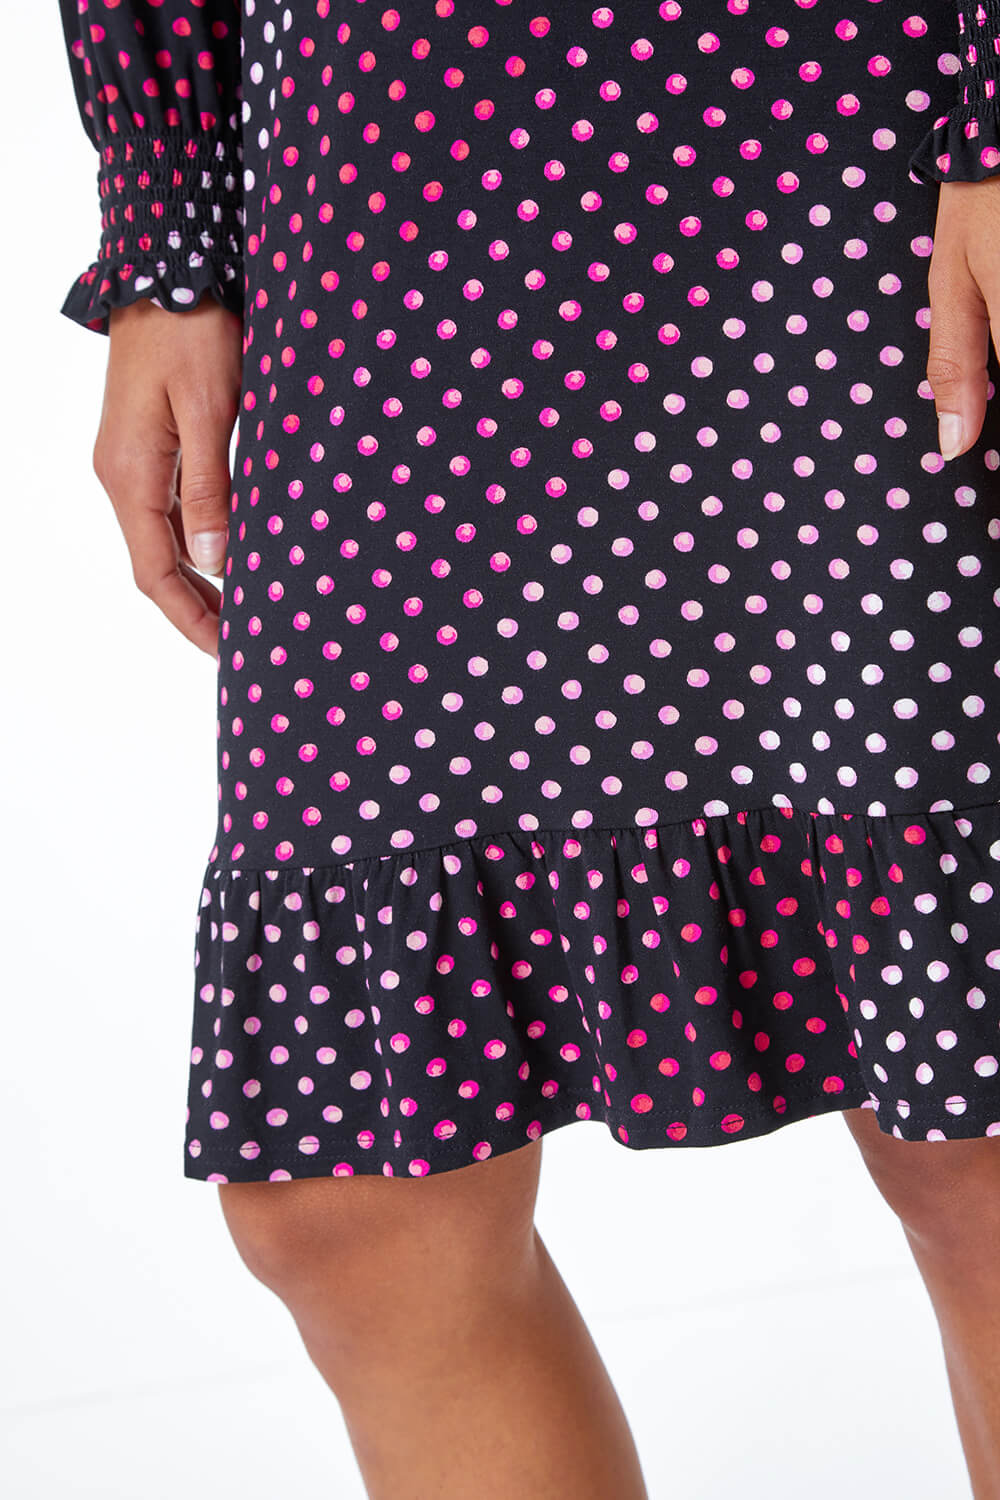 PINK Spot Print Ruched Detail Stretch Dress, Image 5 of 5